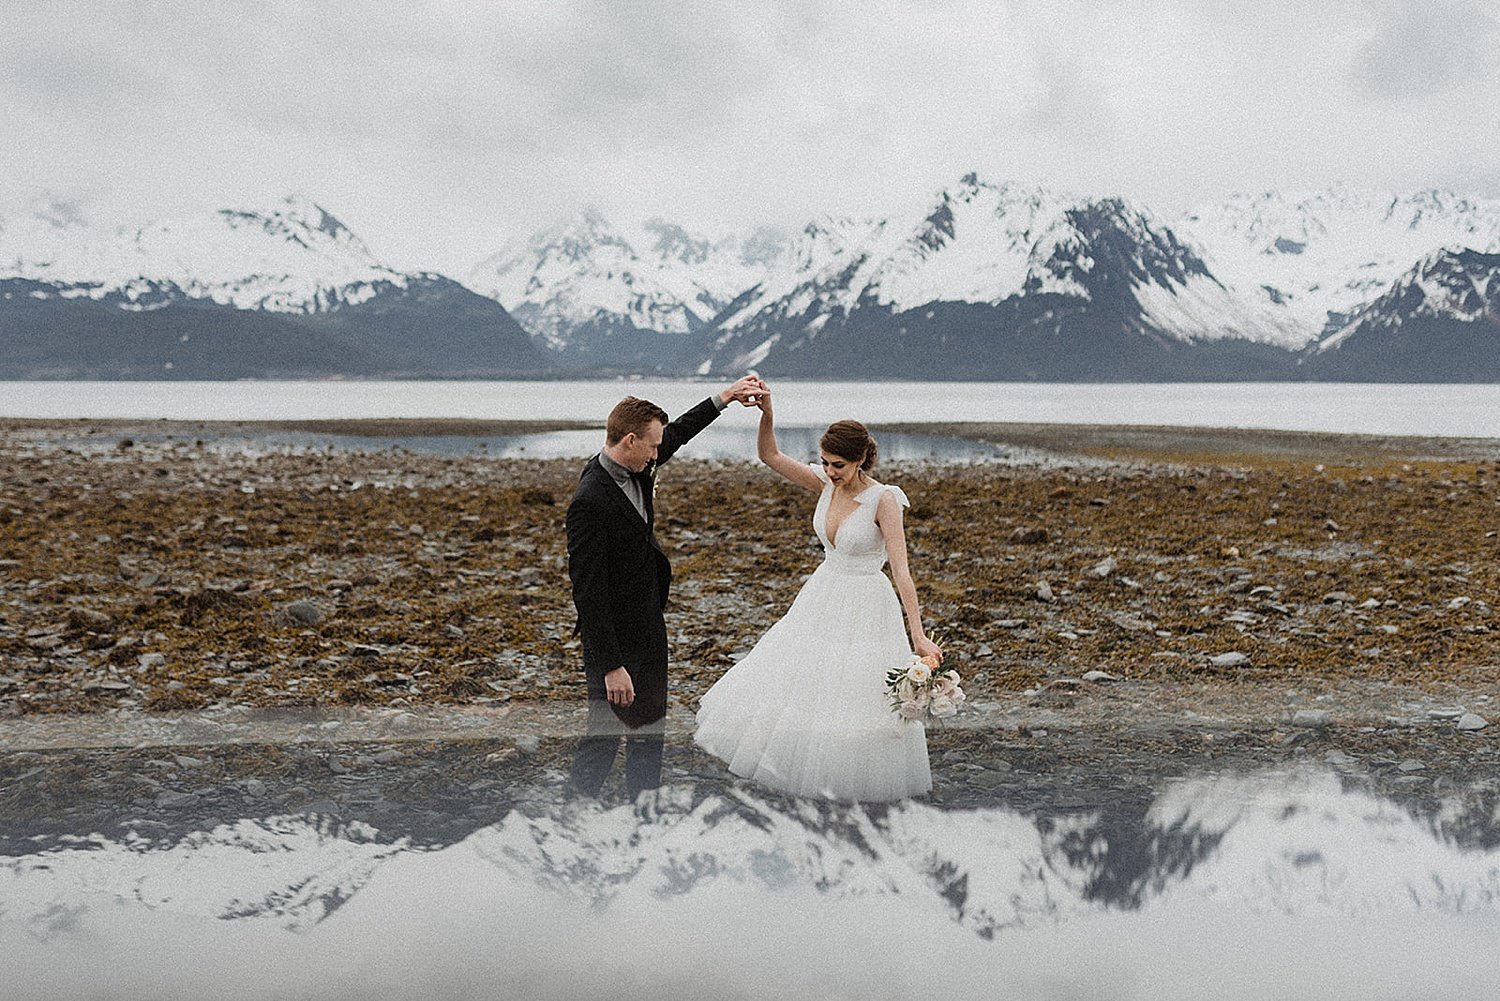  Bride in wedding dress and groom twirling in front of mountain view in alaska vintage inspired shoot 